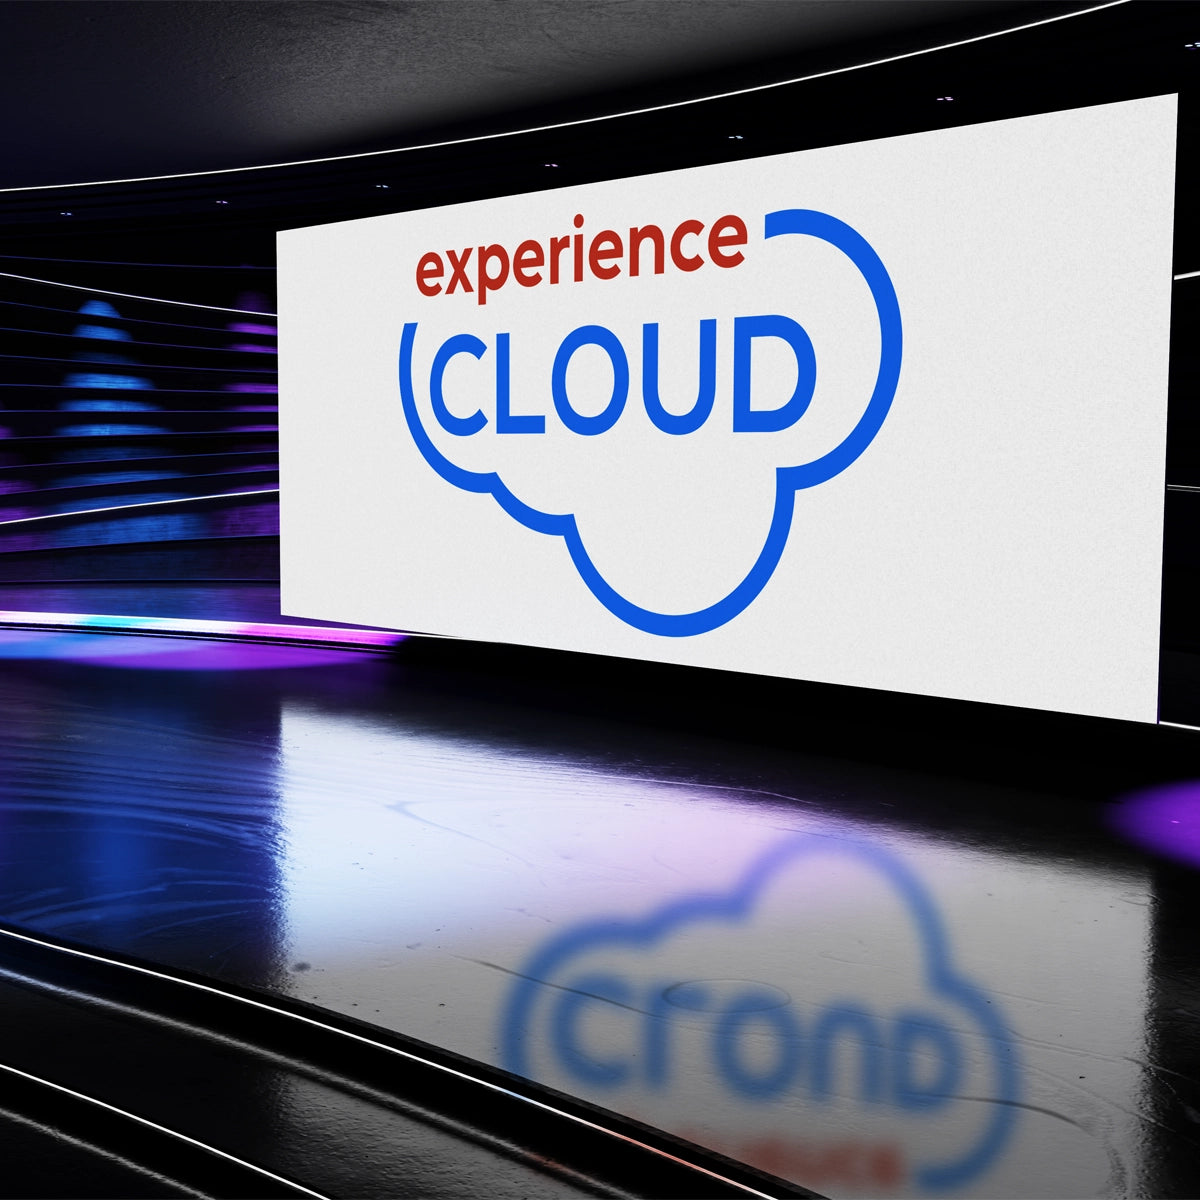 experiencecloud.co